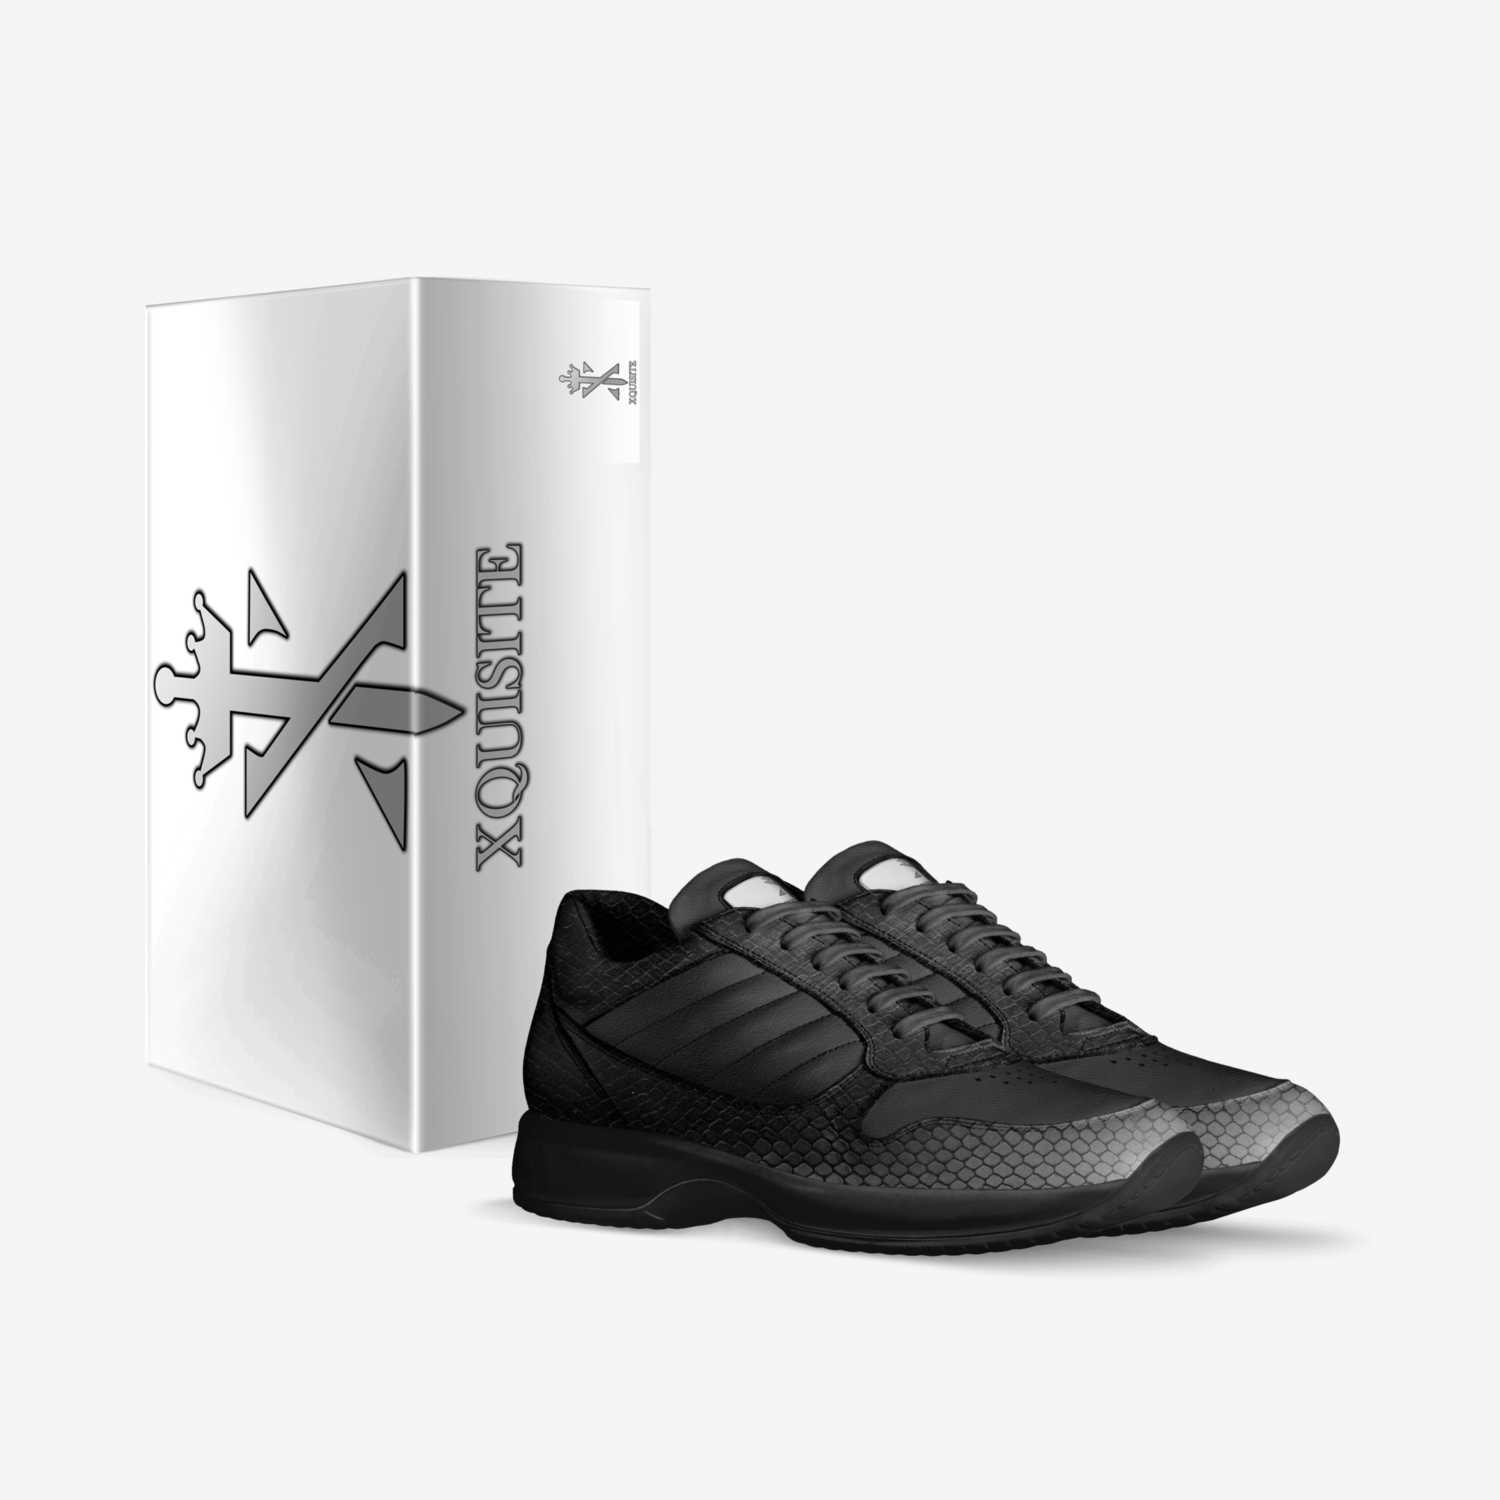 XQUISITE custom made in Italy shoes by Xquisite Footwear | Box view